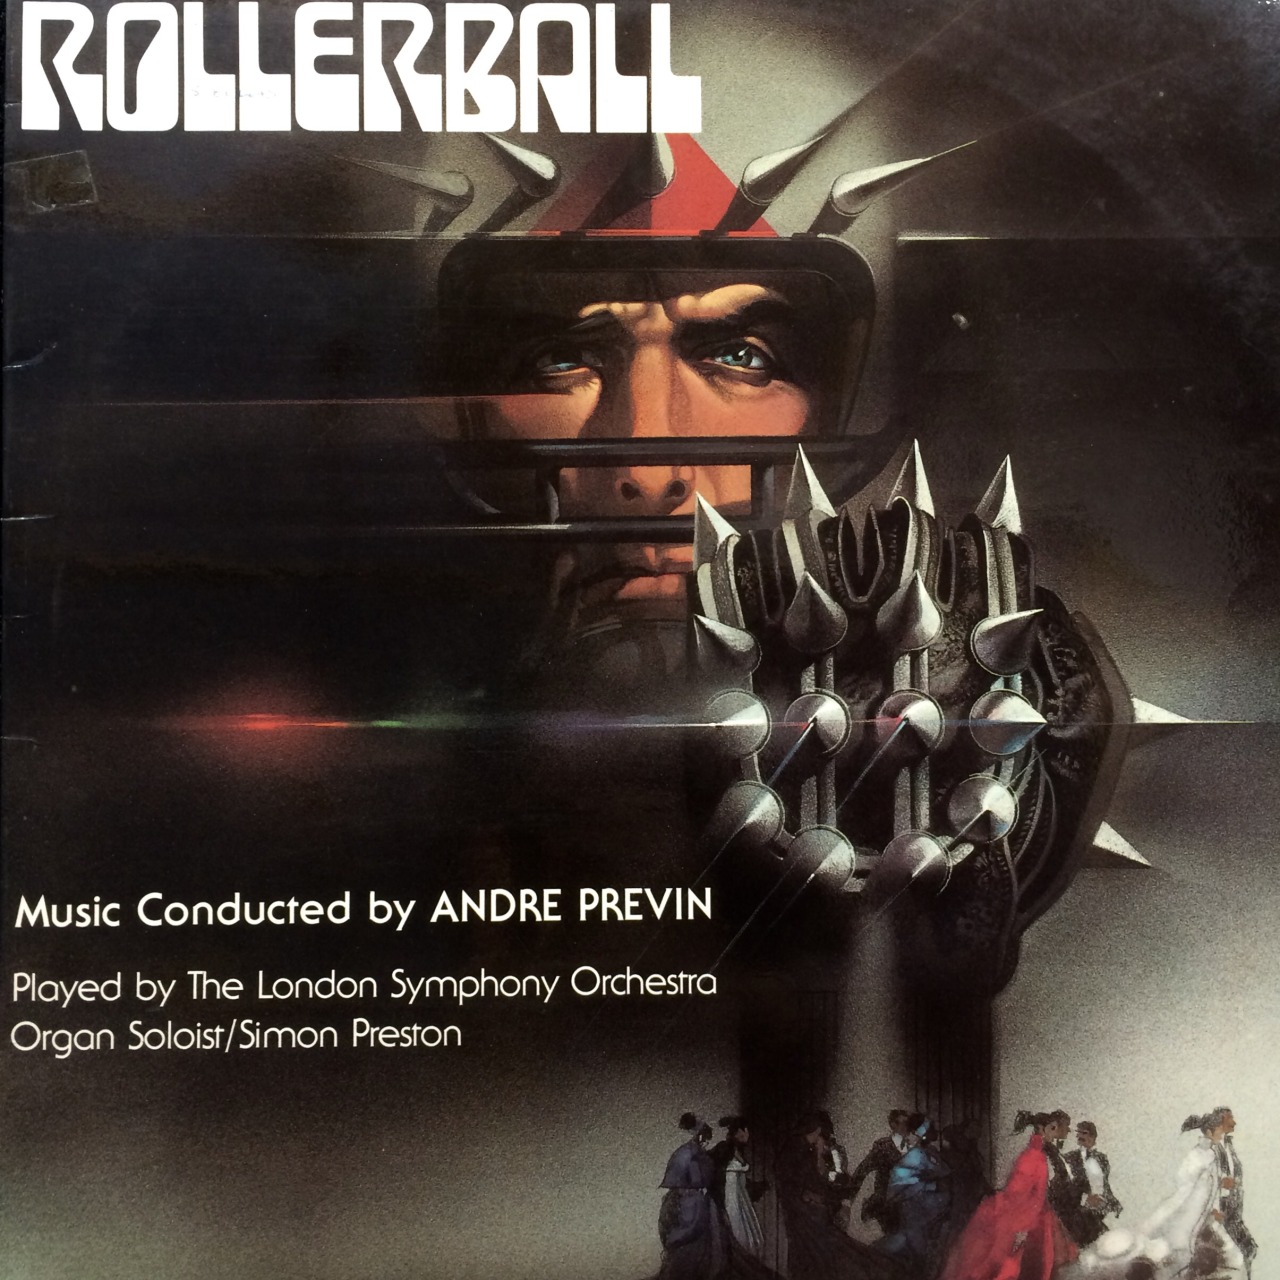 Rollerball Original Soundtrack, Music Conducted by Andre Previn (United Artists,